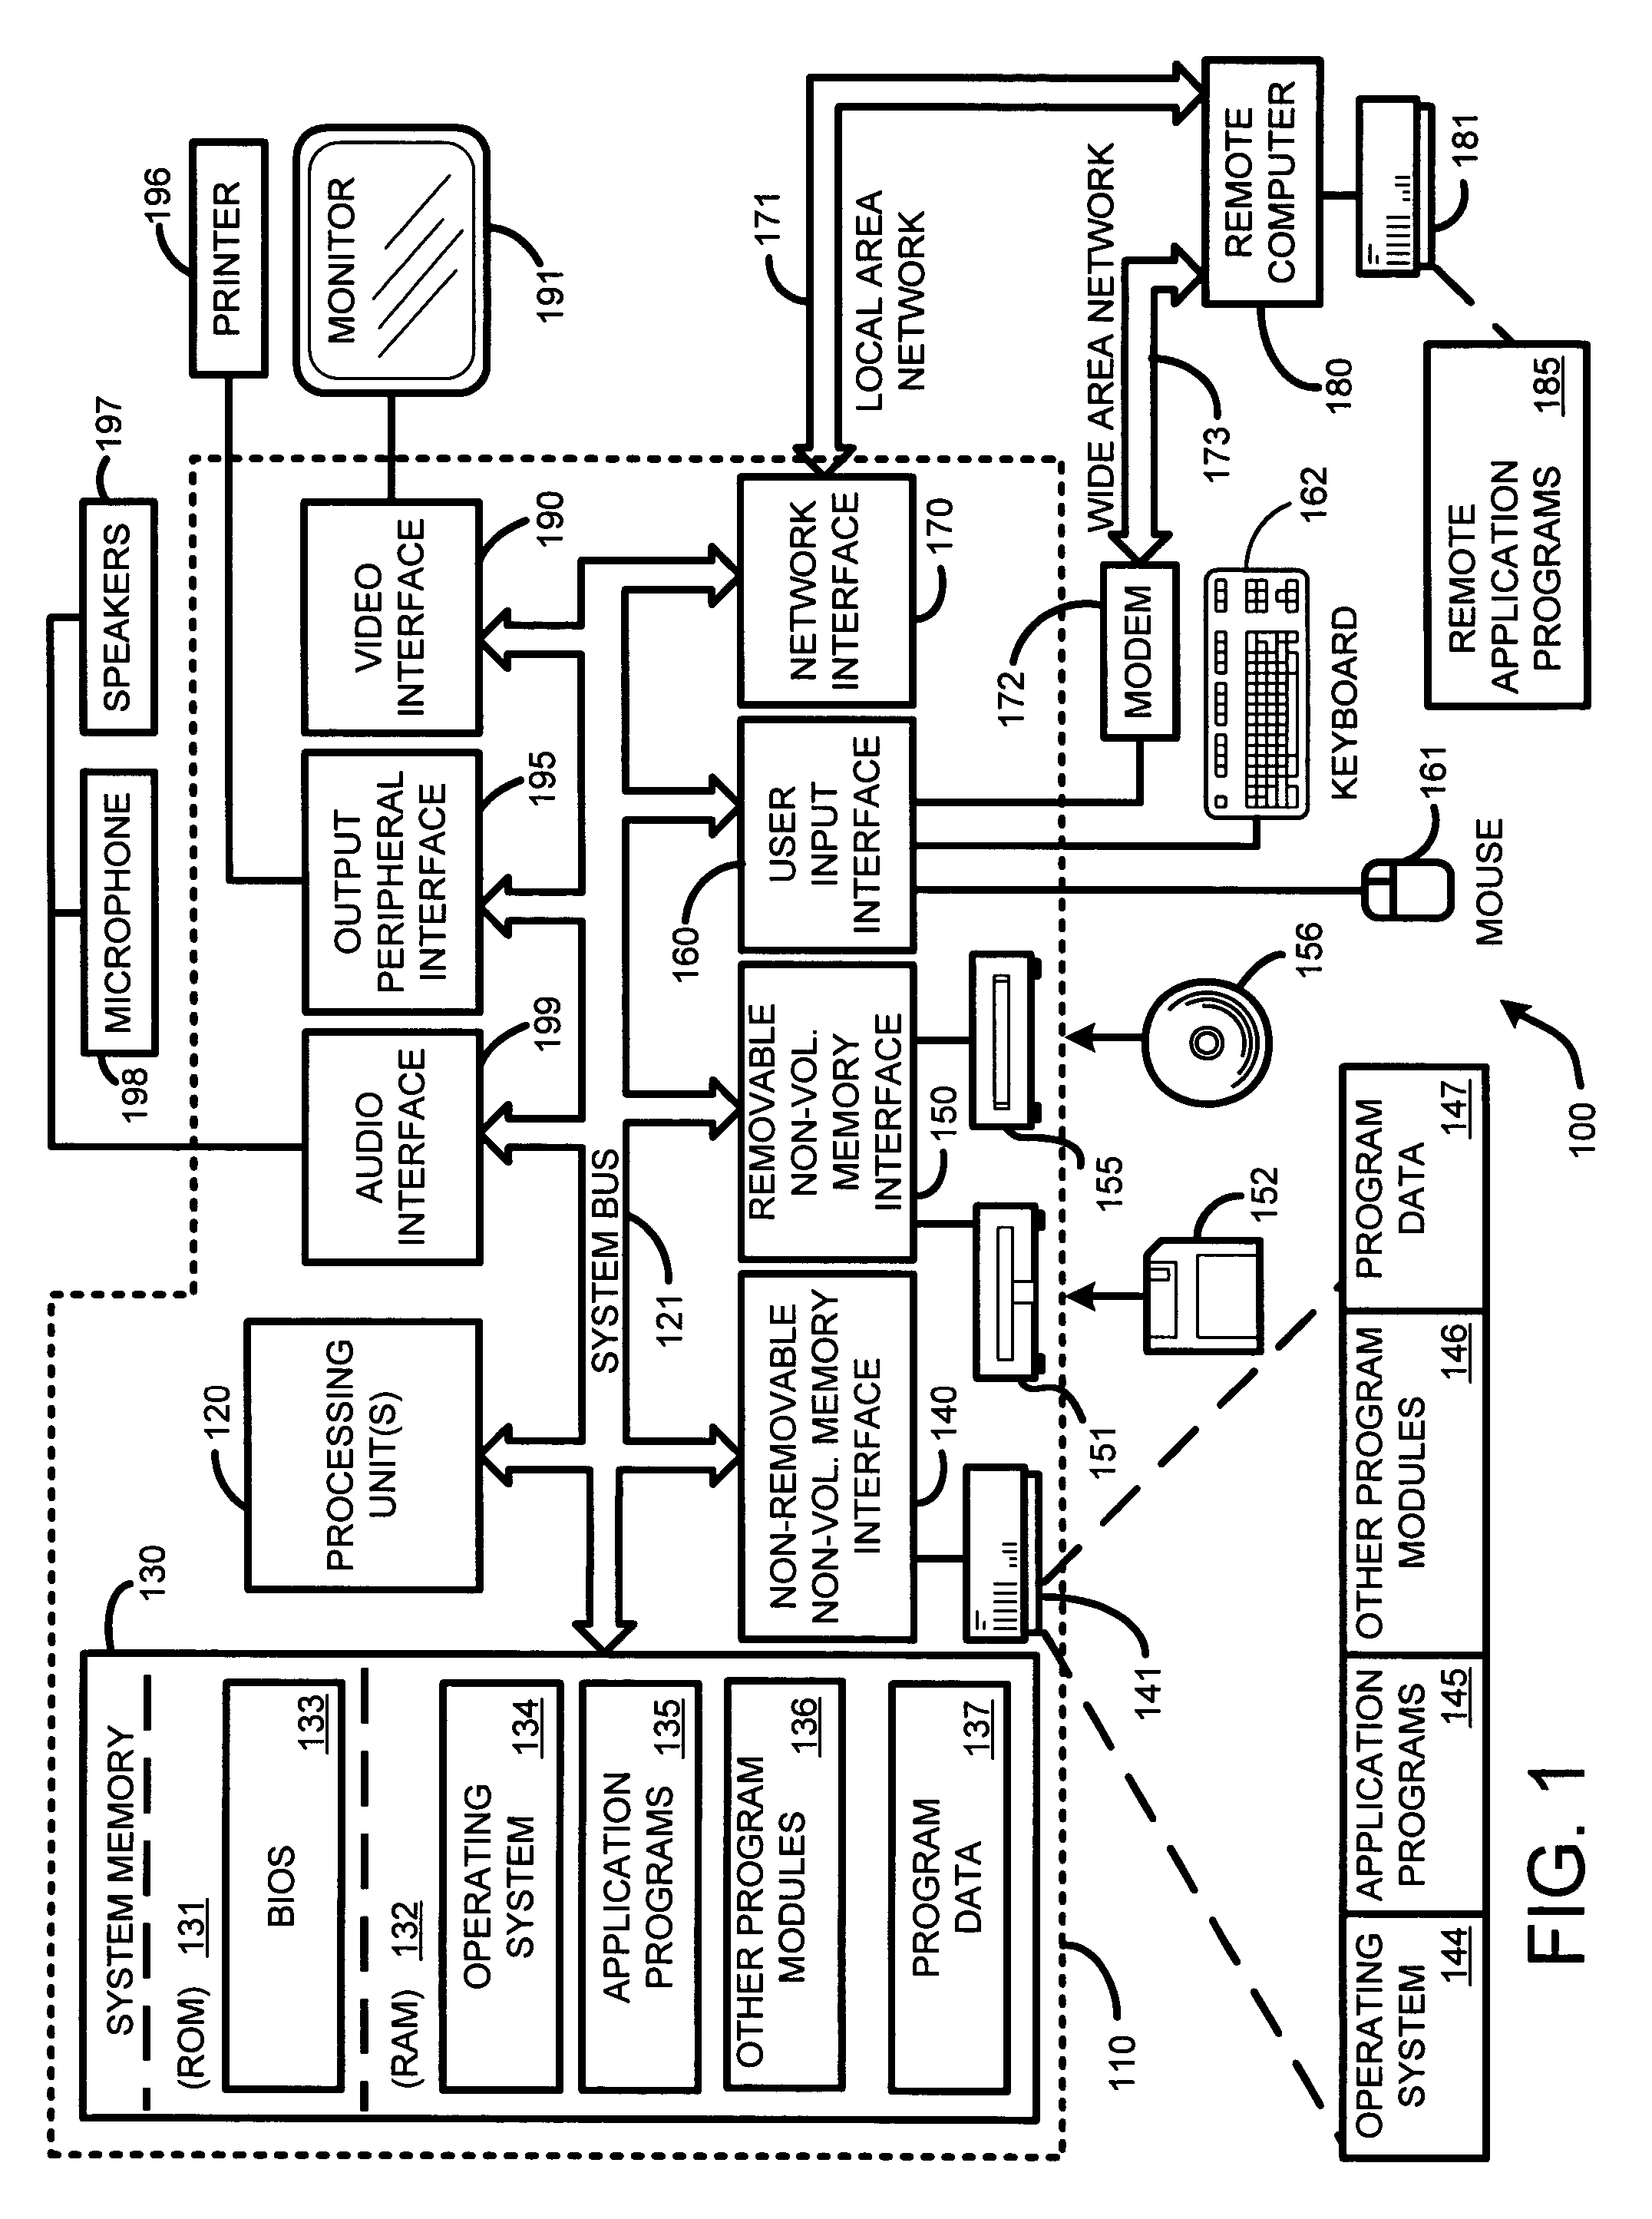 System and method for real-time jitter control and packet-loss concealment in an audio signal